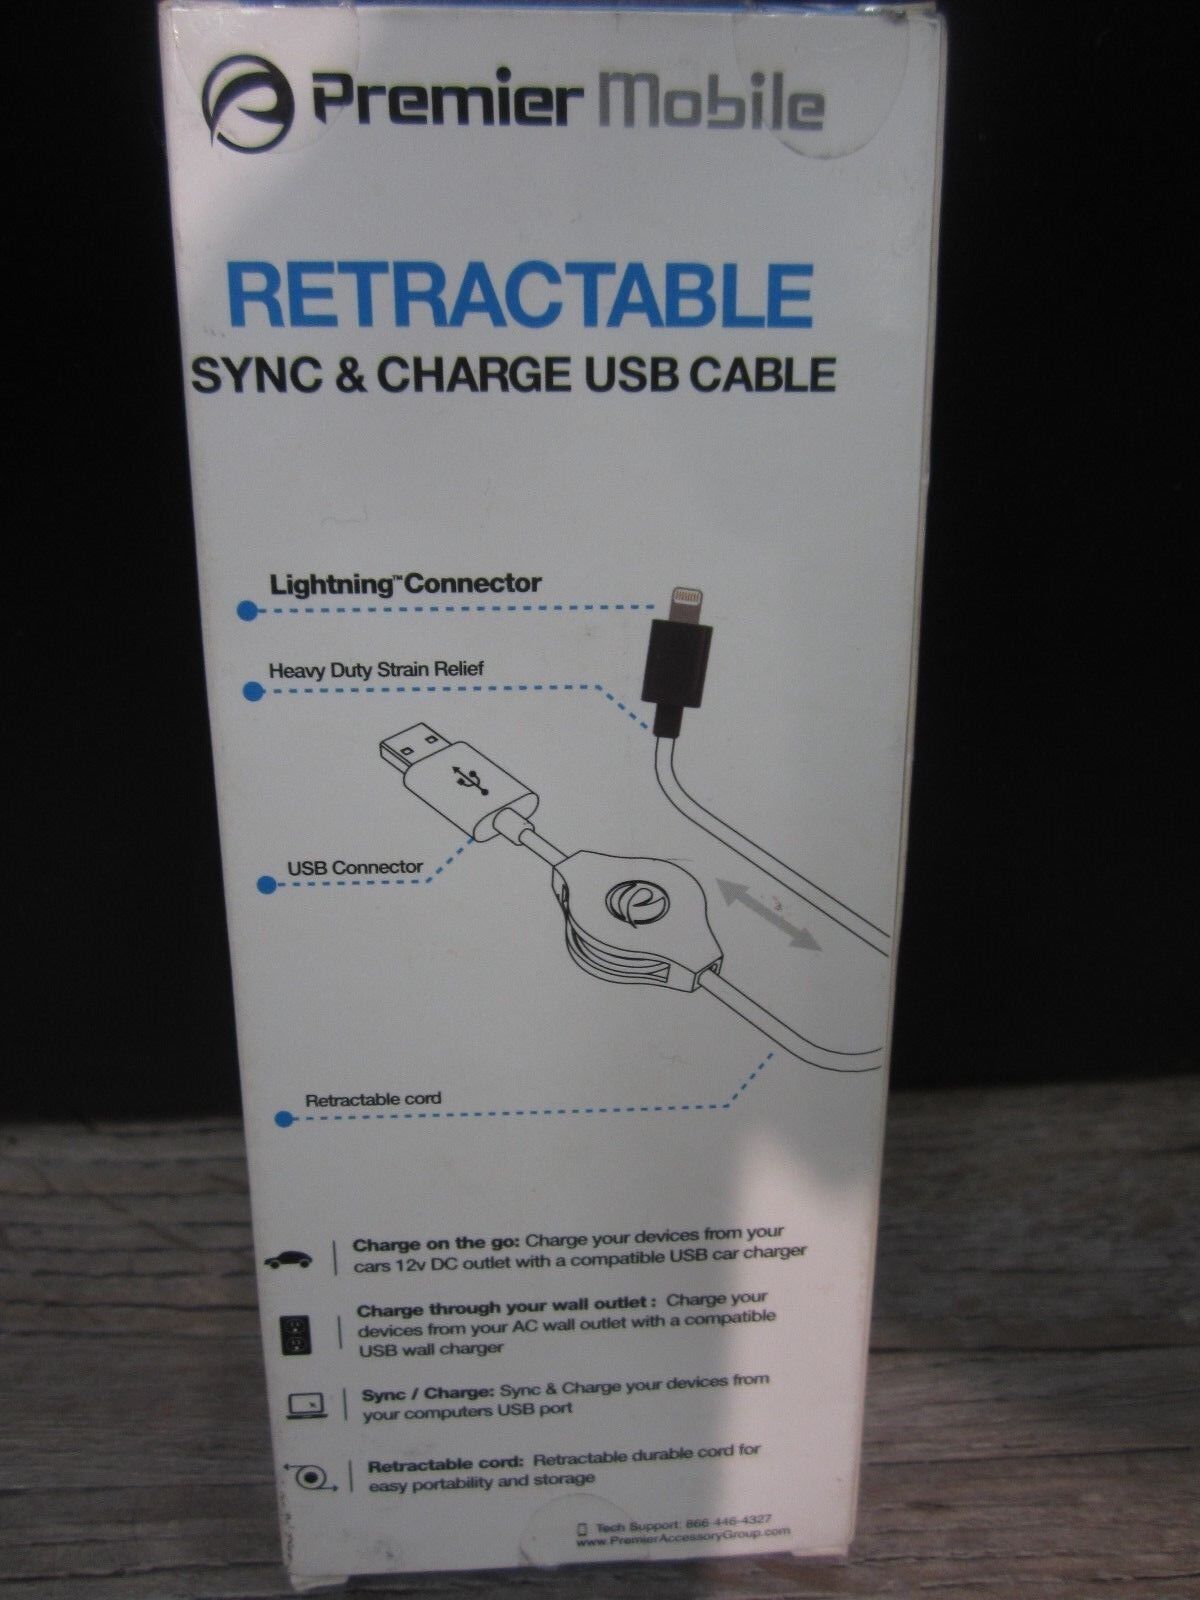 Premier Mobile Retractable Sync&Charge USB Cable for Lightning Connector Devices